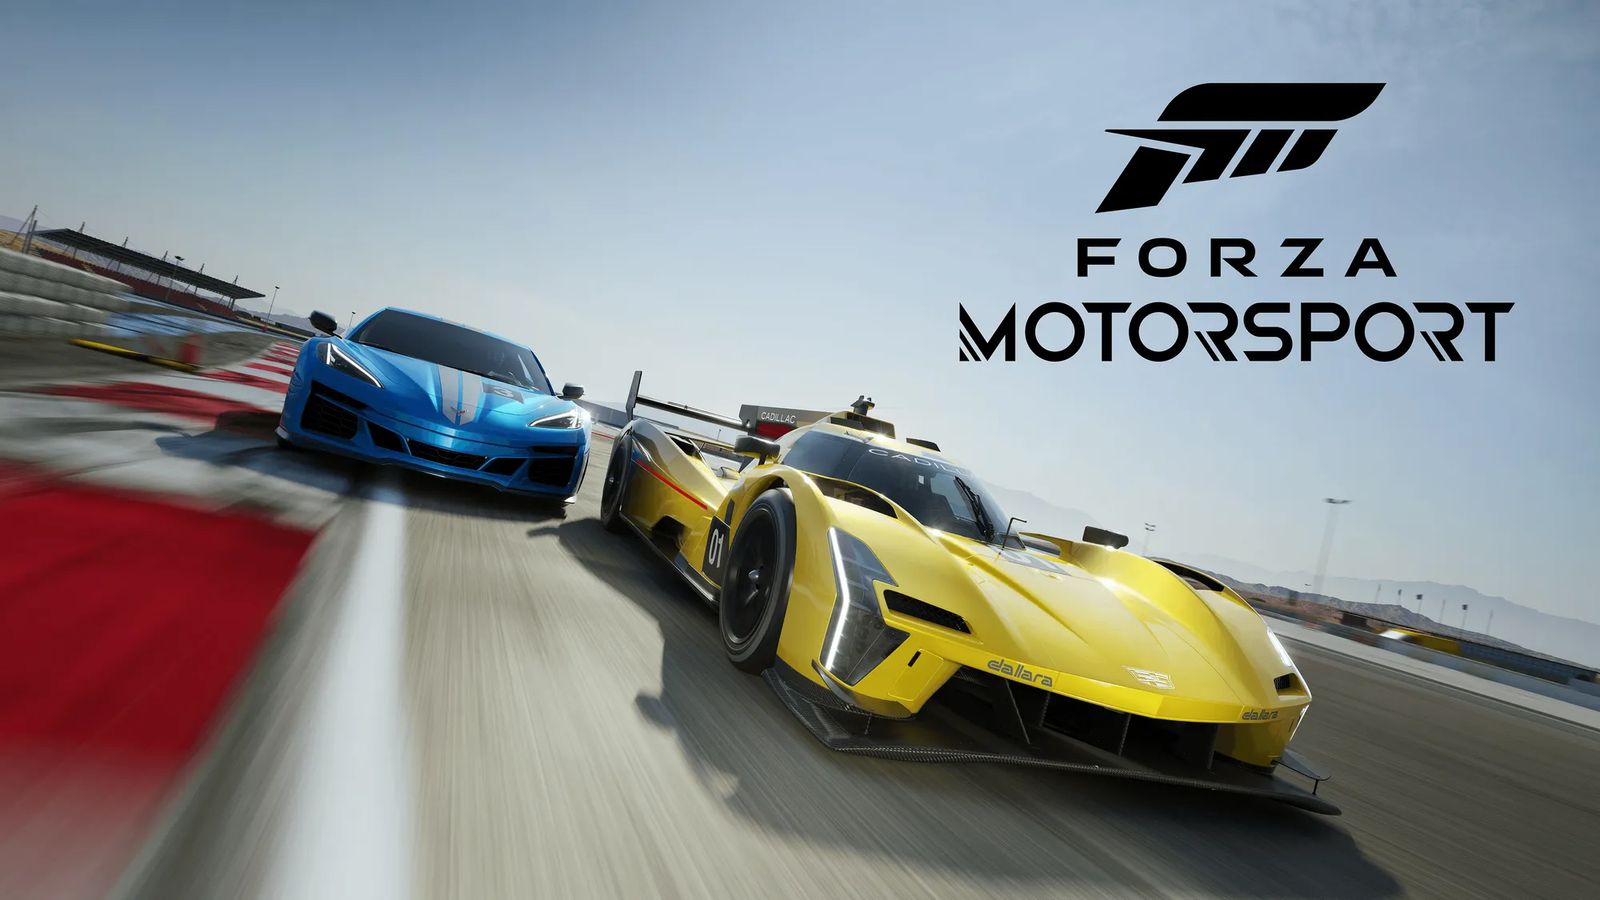 The cover cars of Forza Motorsport